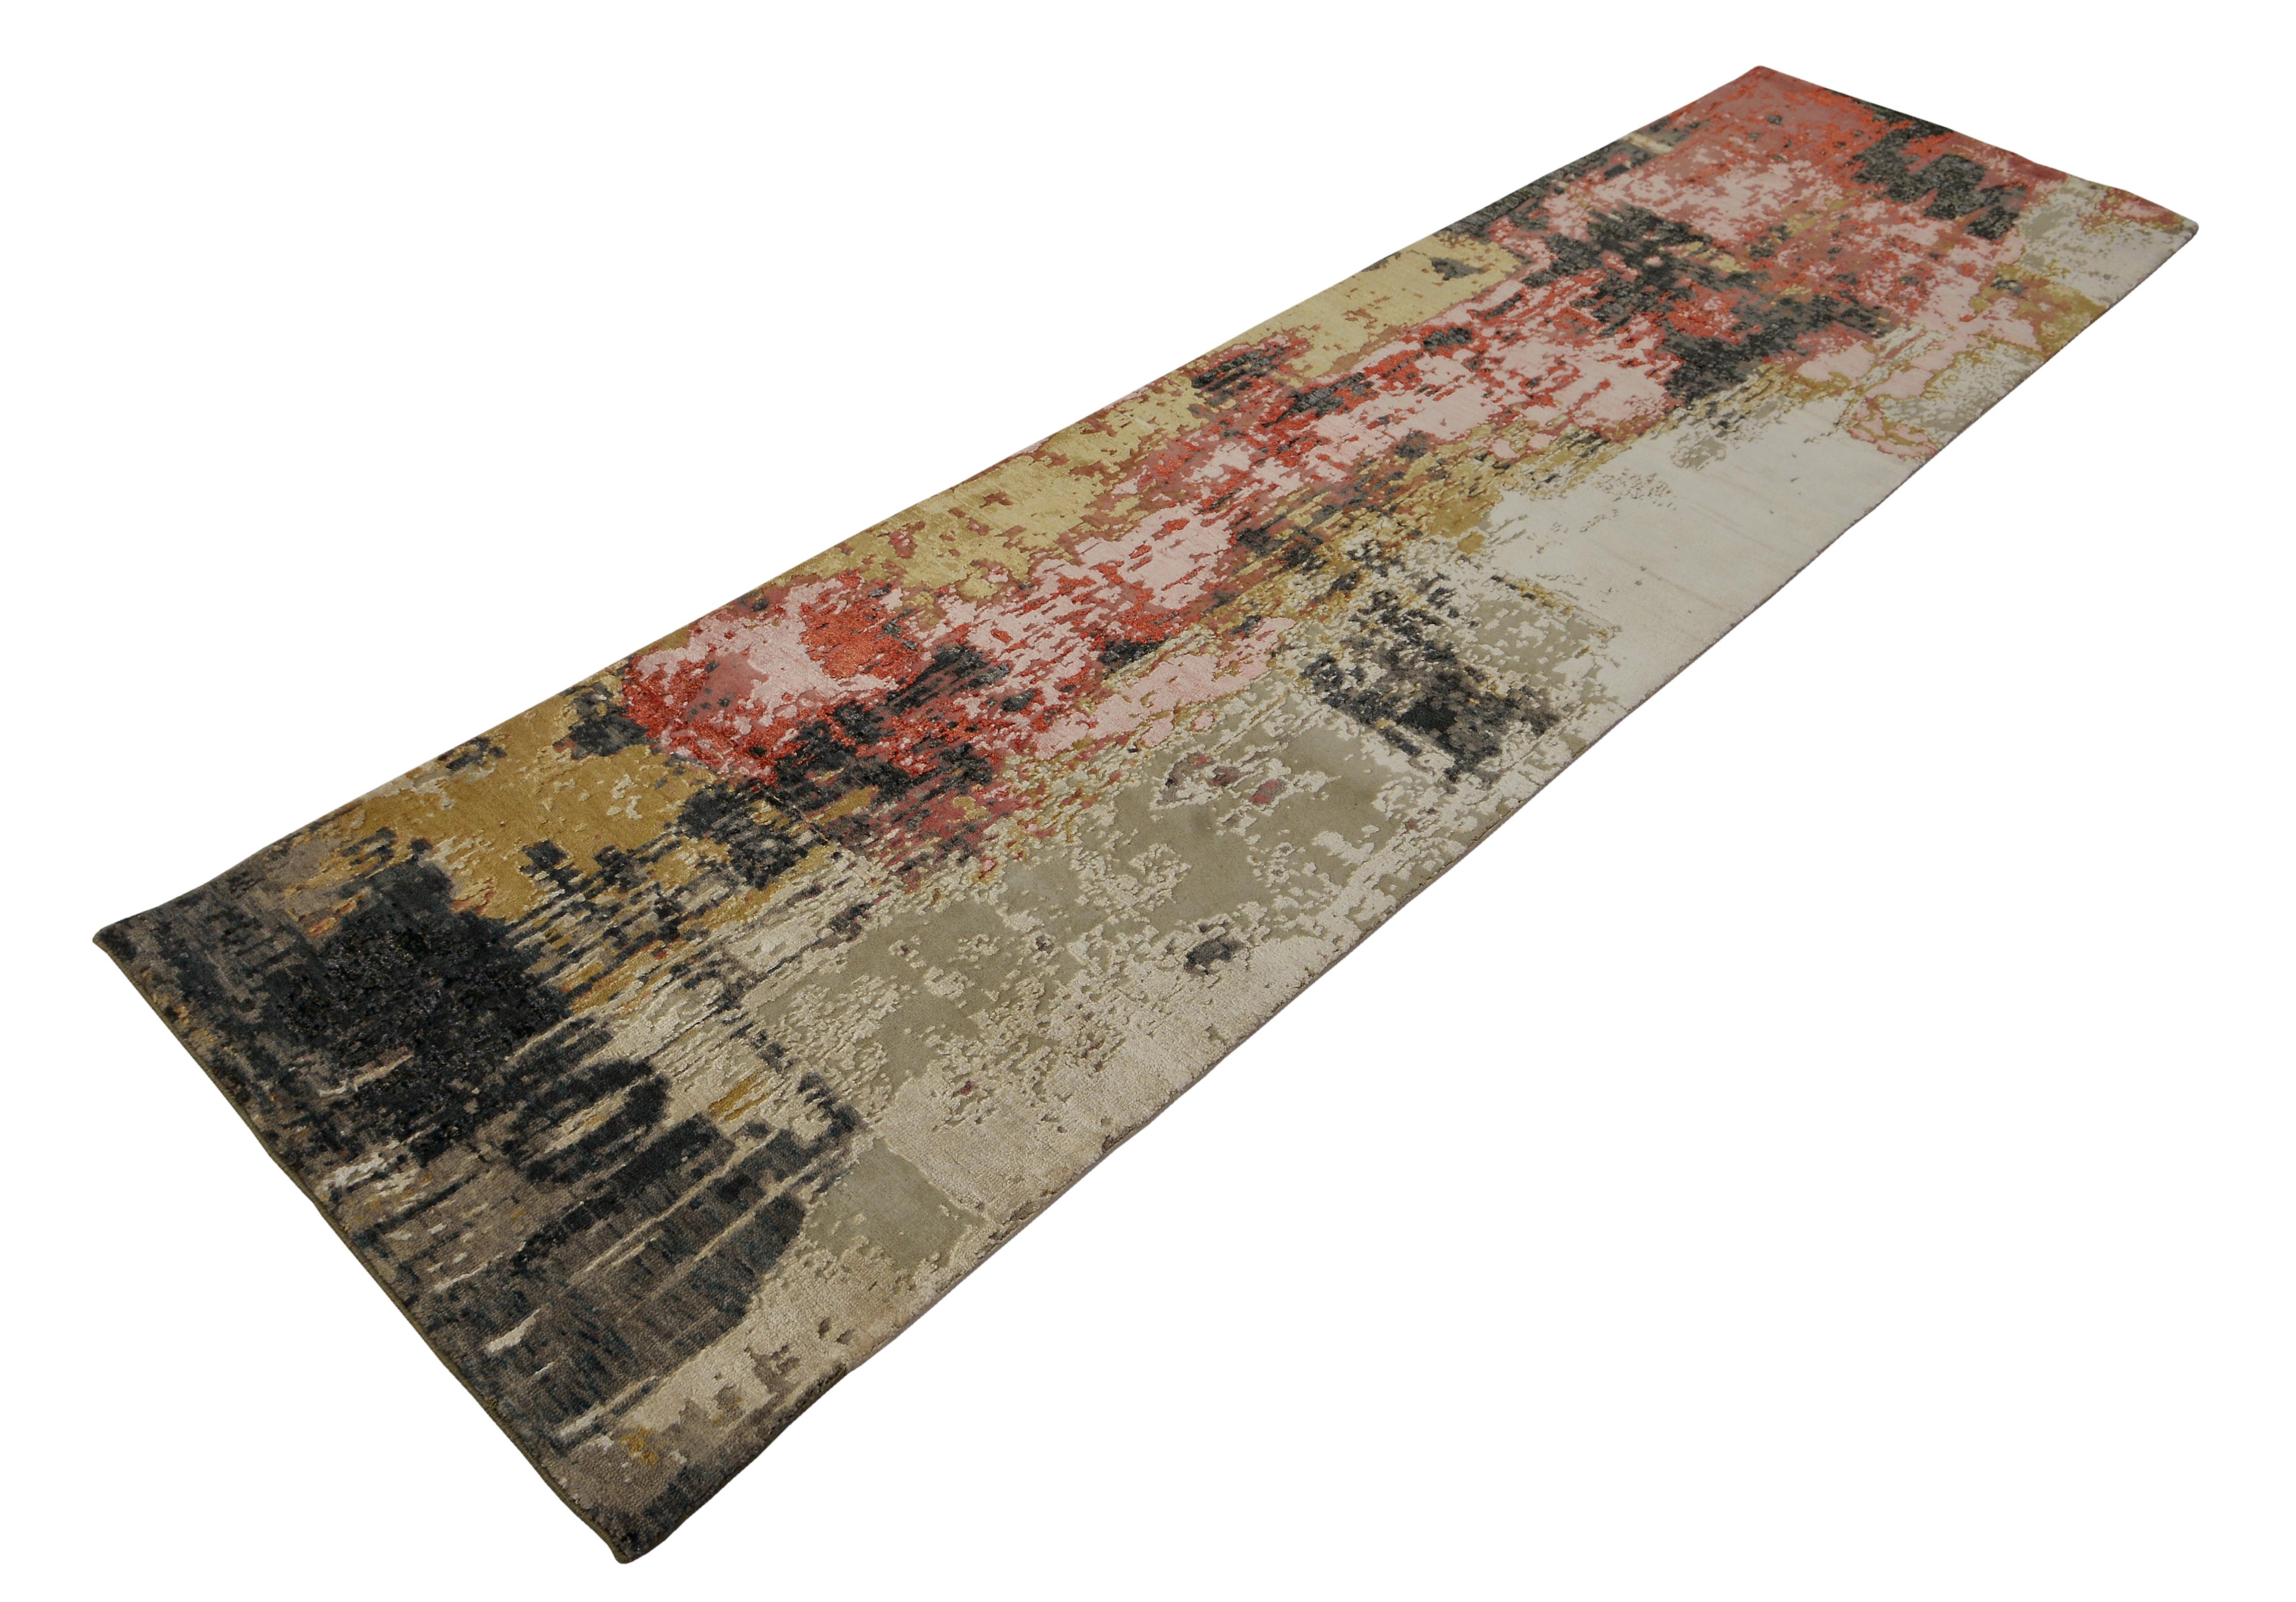 A new addition to the handmade rugs in the abstract rug line by Rug & Kilim, this 2'6'' x 8'1'' modern runner is hand knotted in a unique, proprietary blend of quality wool and silk, the natural luster of the latter bringing out modern hues of beige